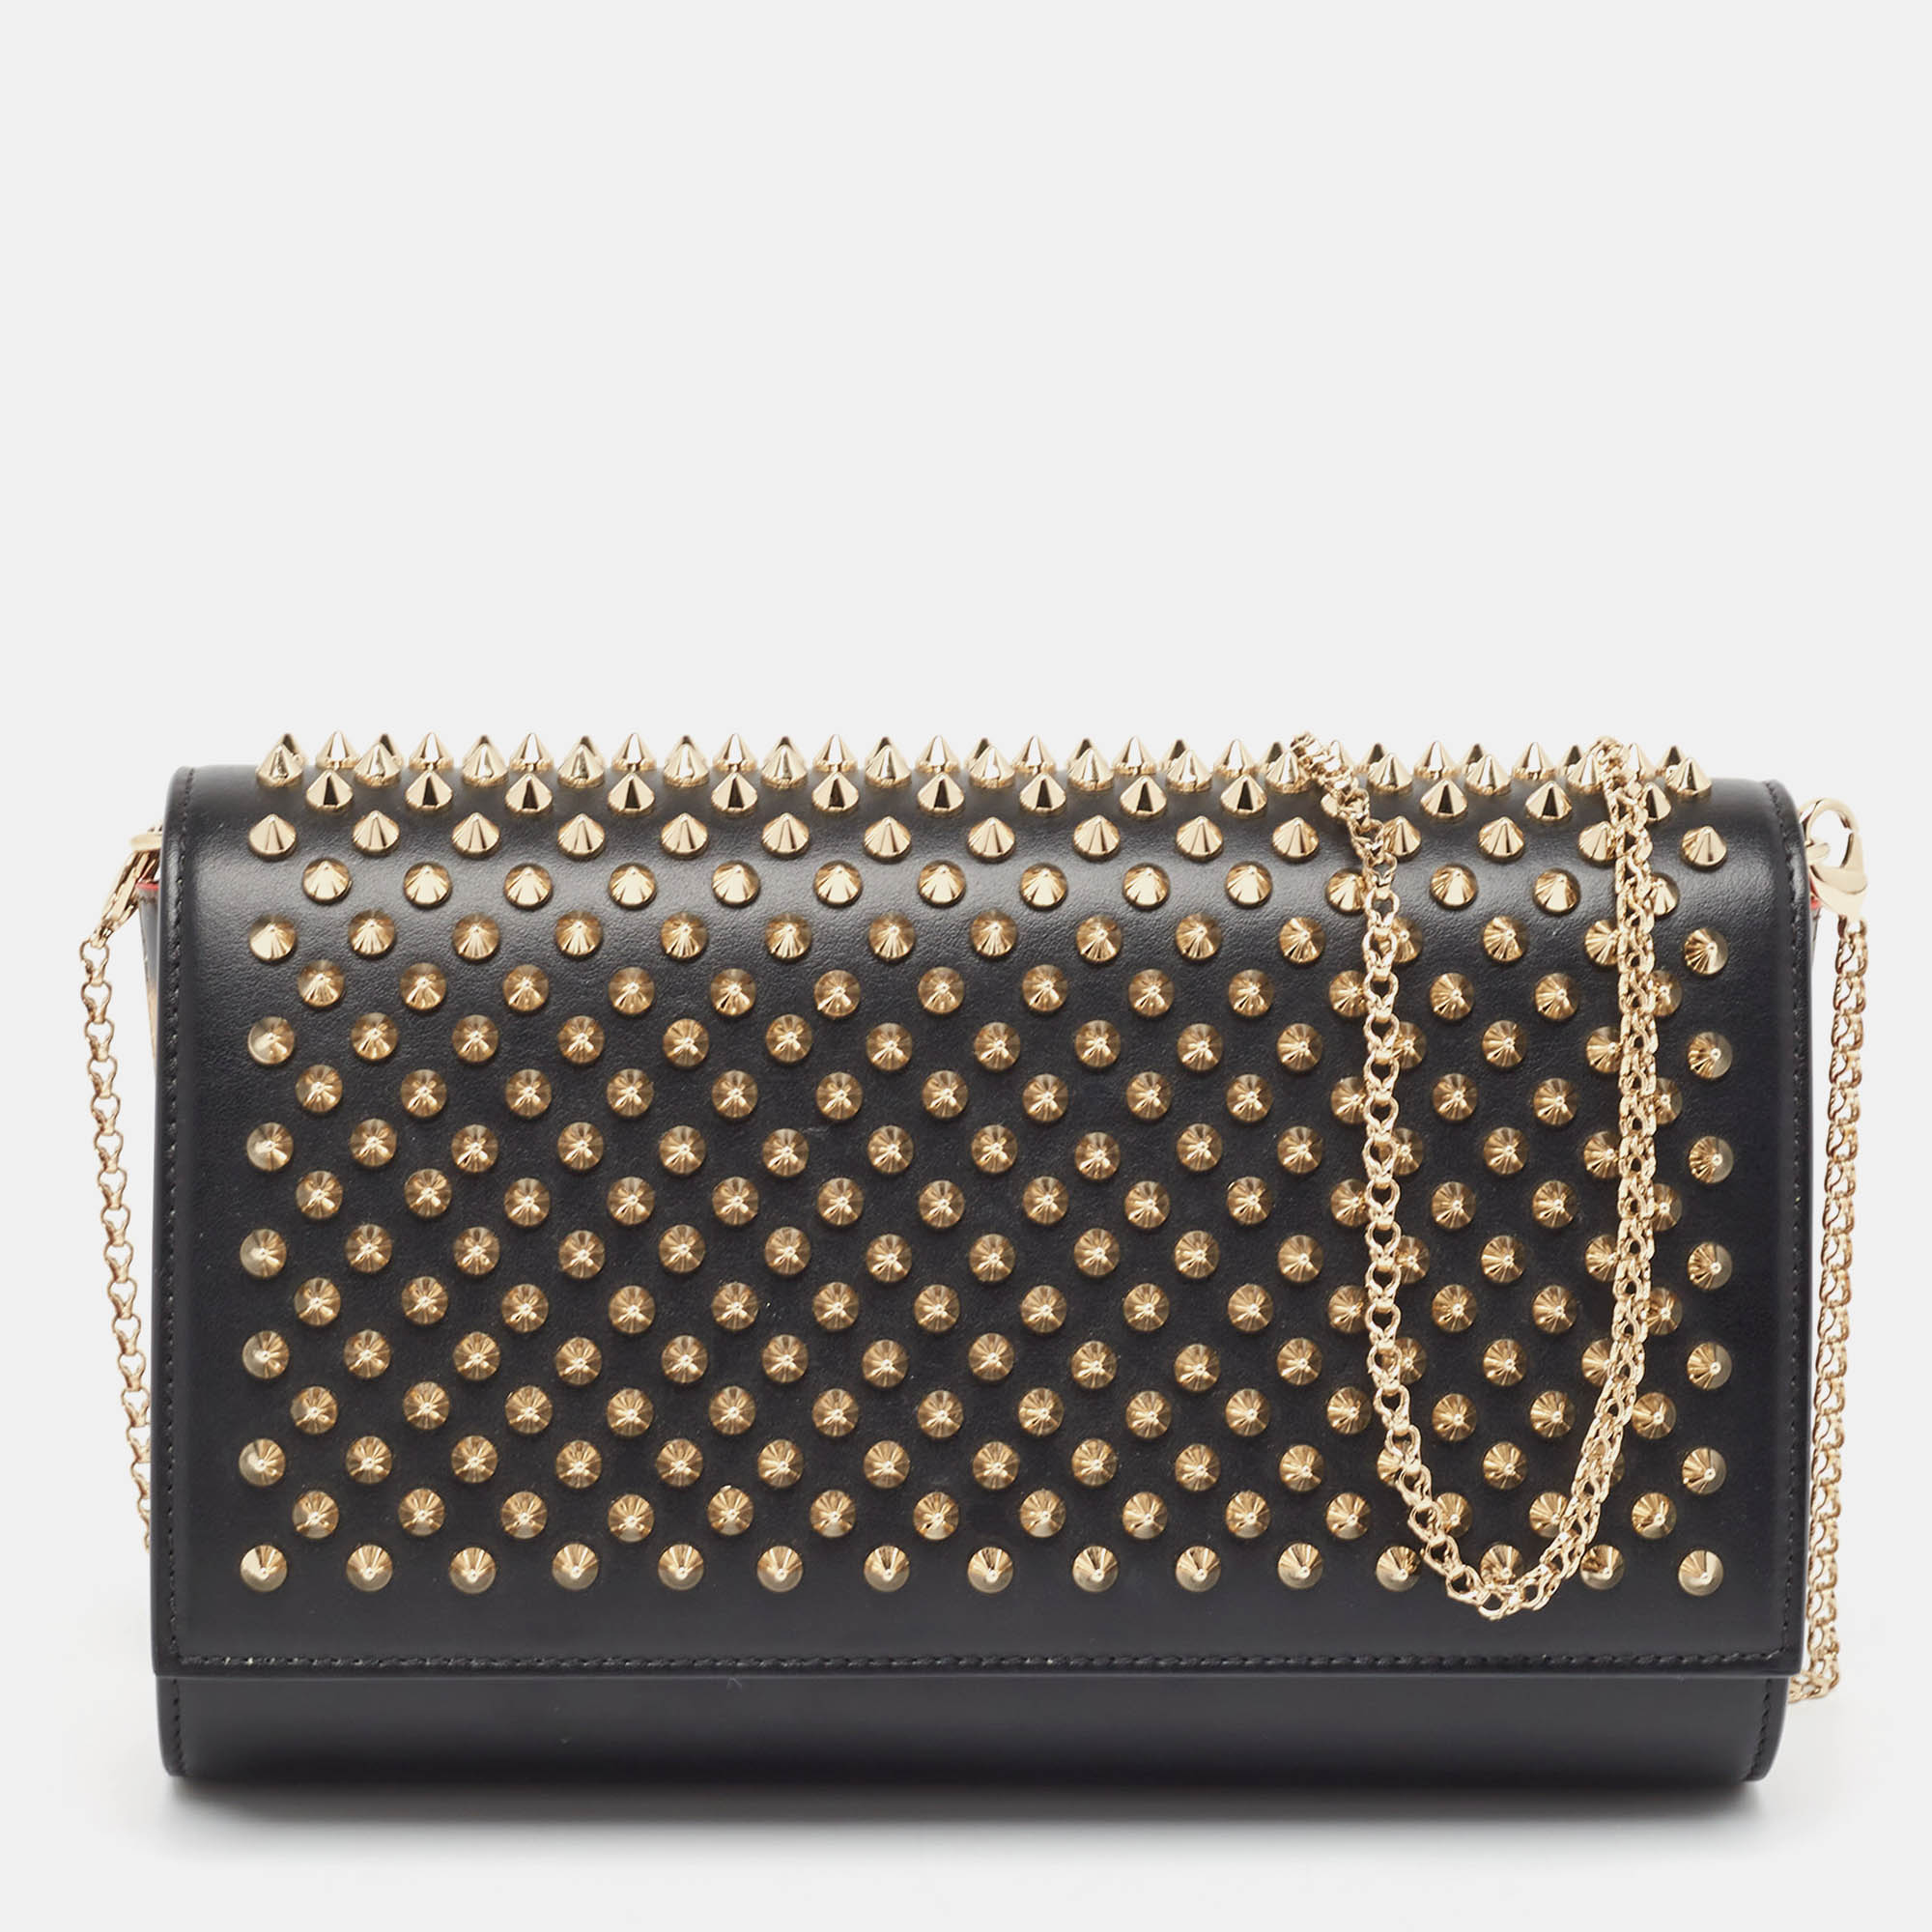 

Christian Louboutin Black Leather Paloma Spiked Chain Clutch